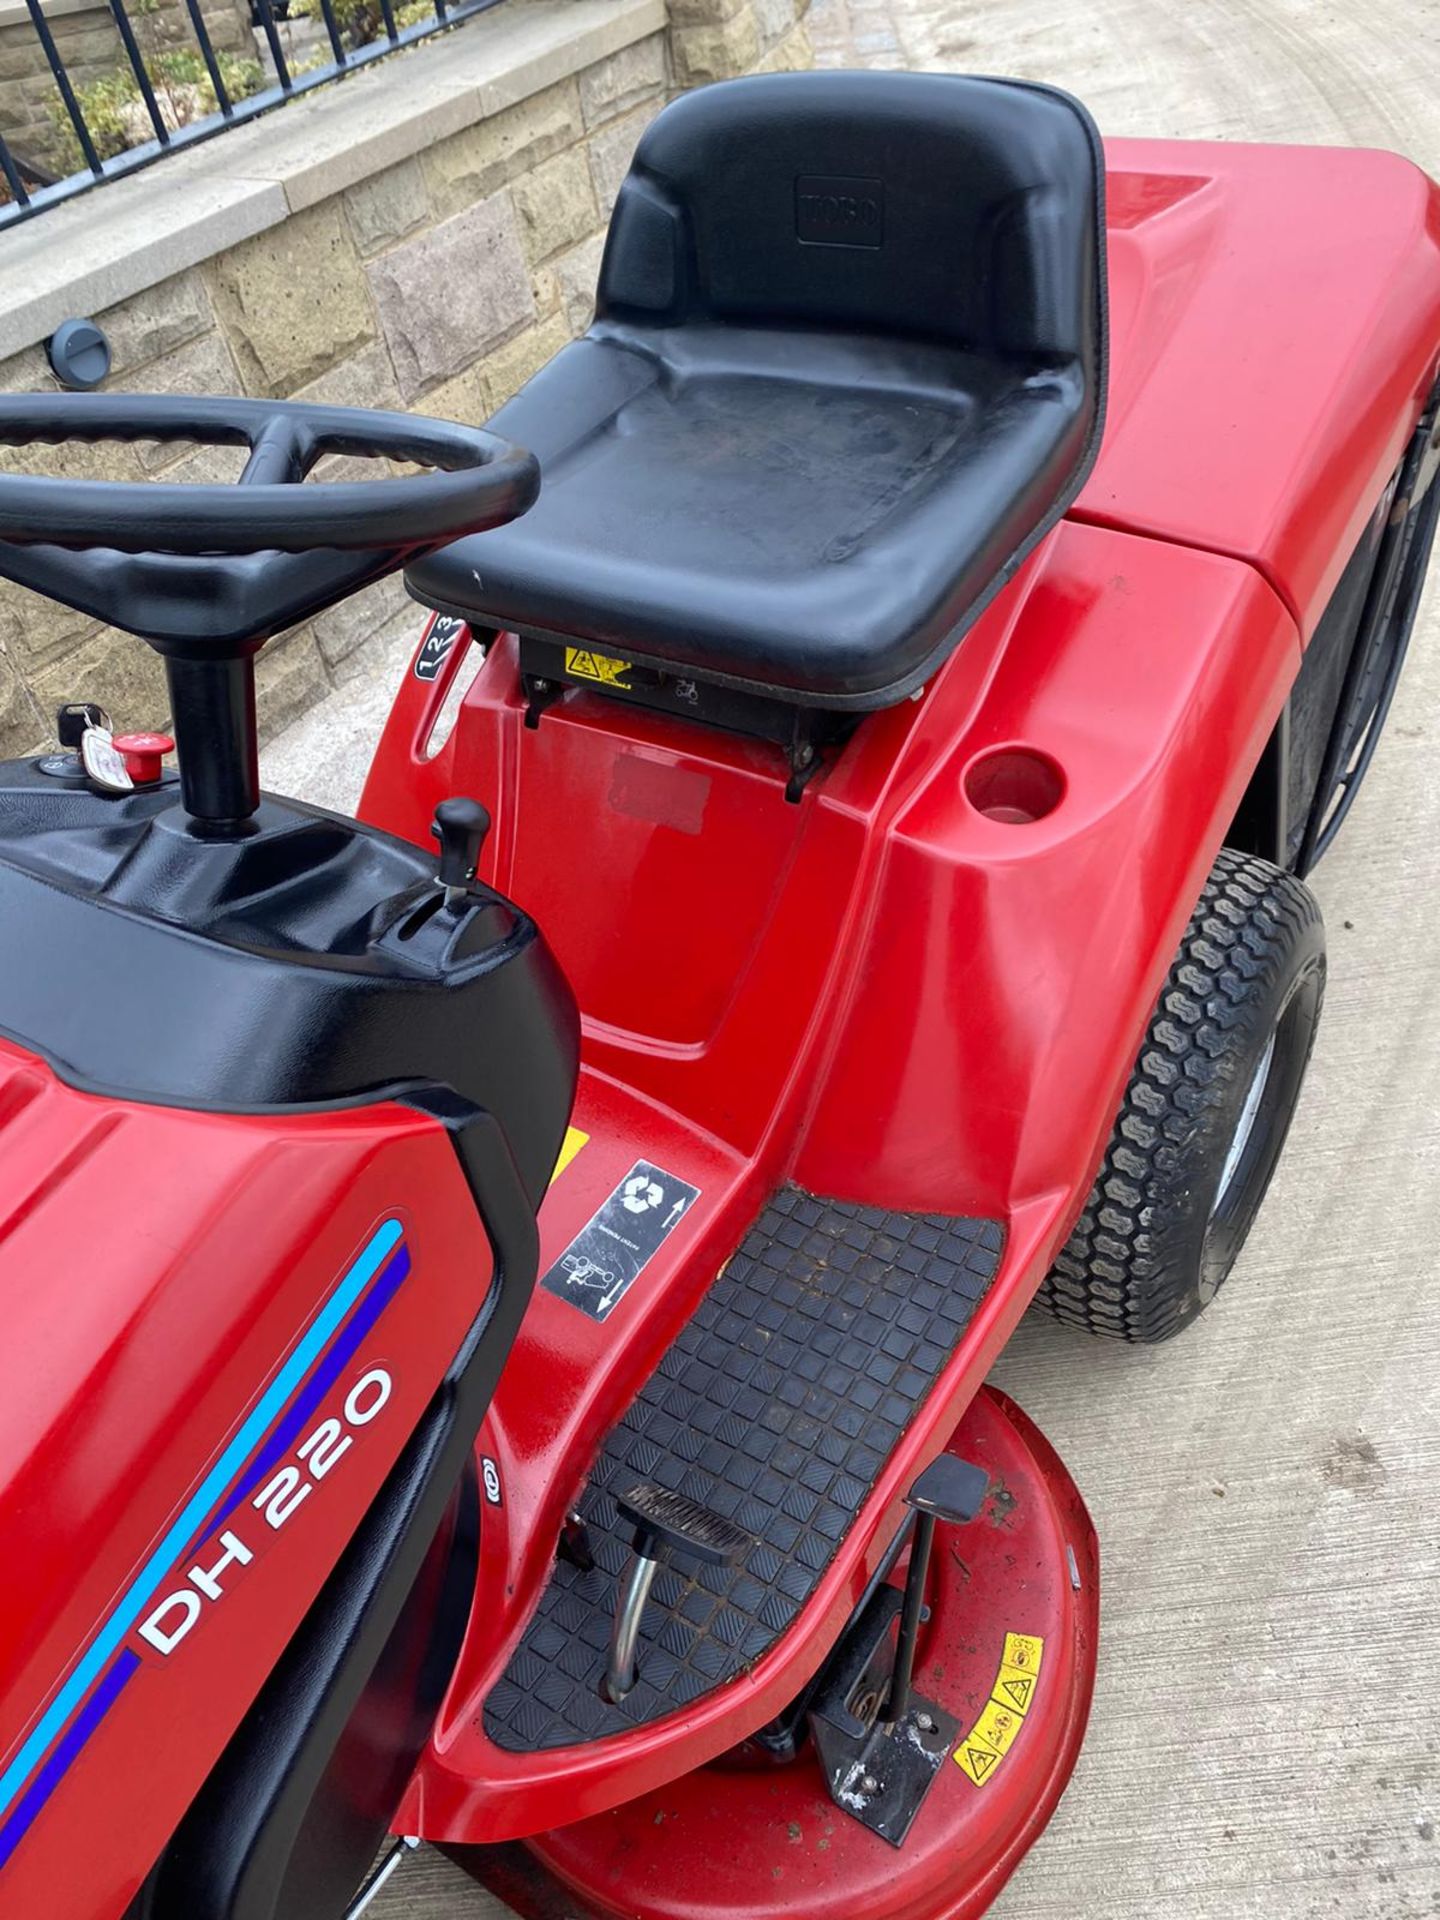 TORO DH220 RIDE ON LAWN MOWER, VERY GOOD CONDITION, V TWIN 22HP ENGINE, RUNS, WORKS & CUTS *NO VAT* - Image 3 of 6